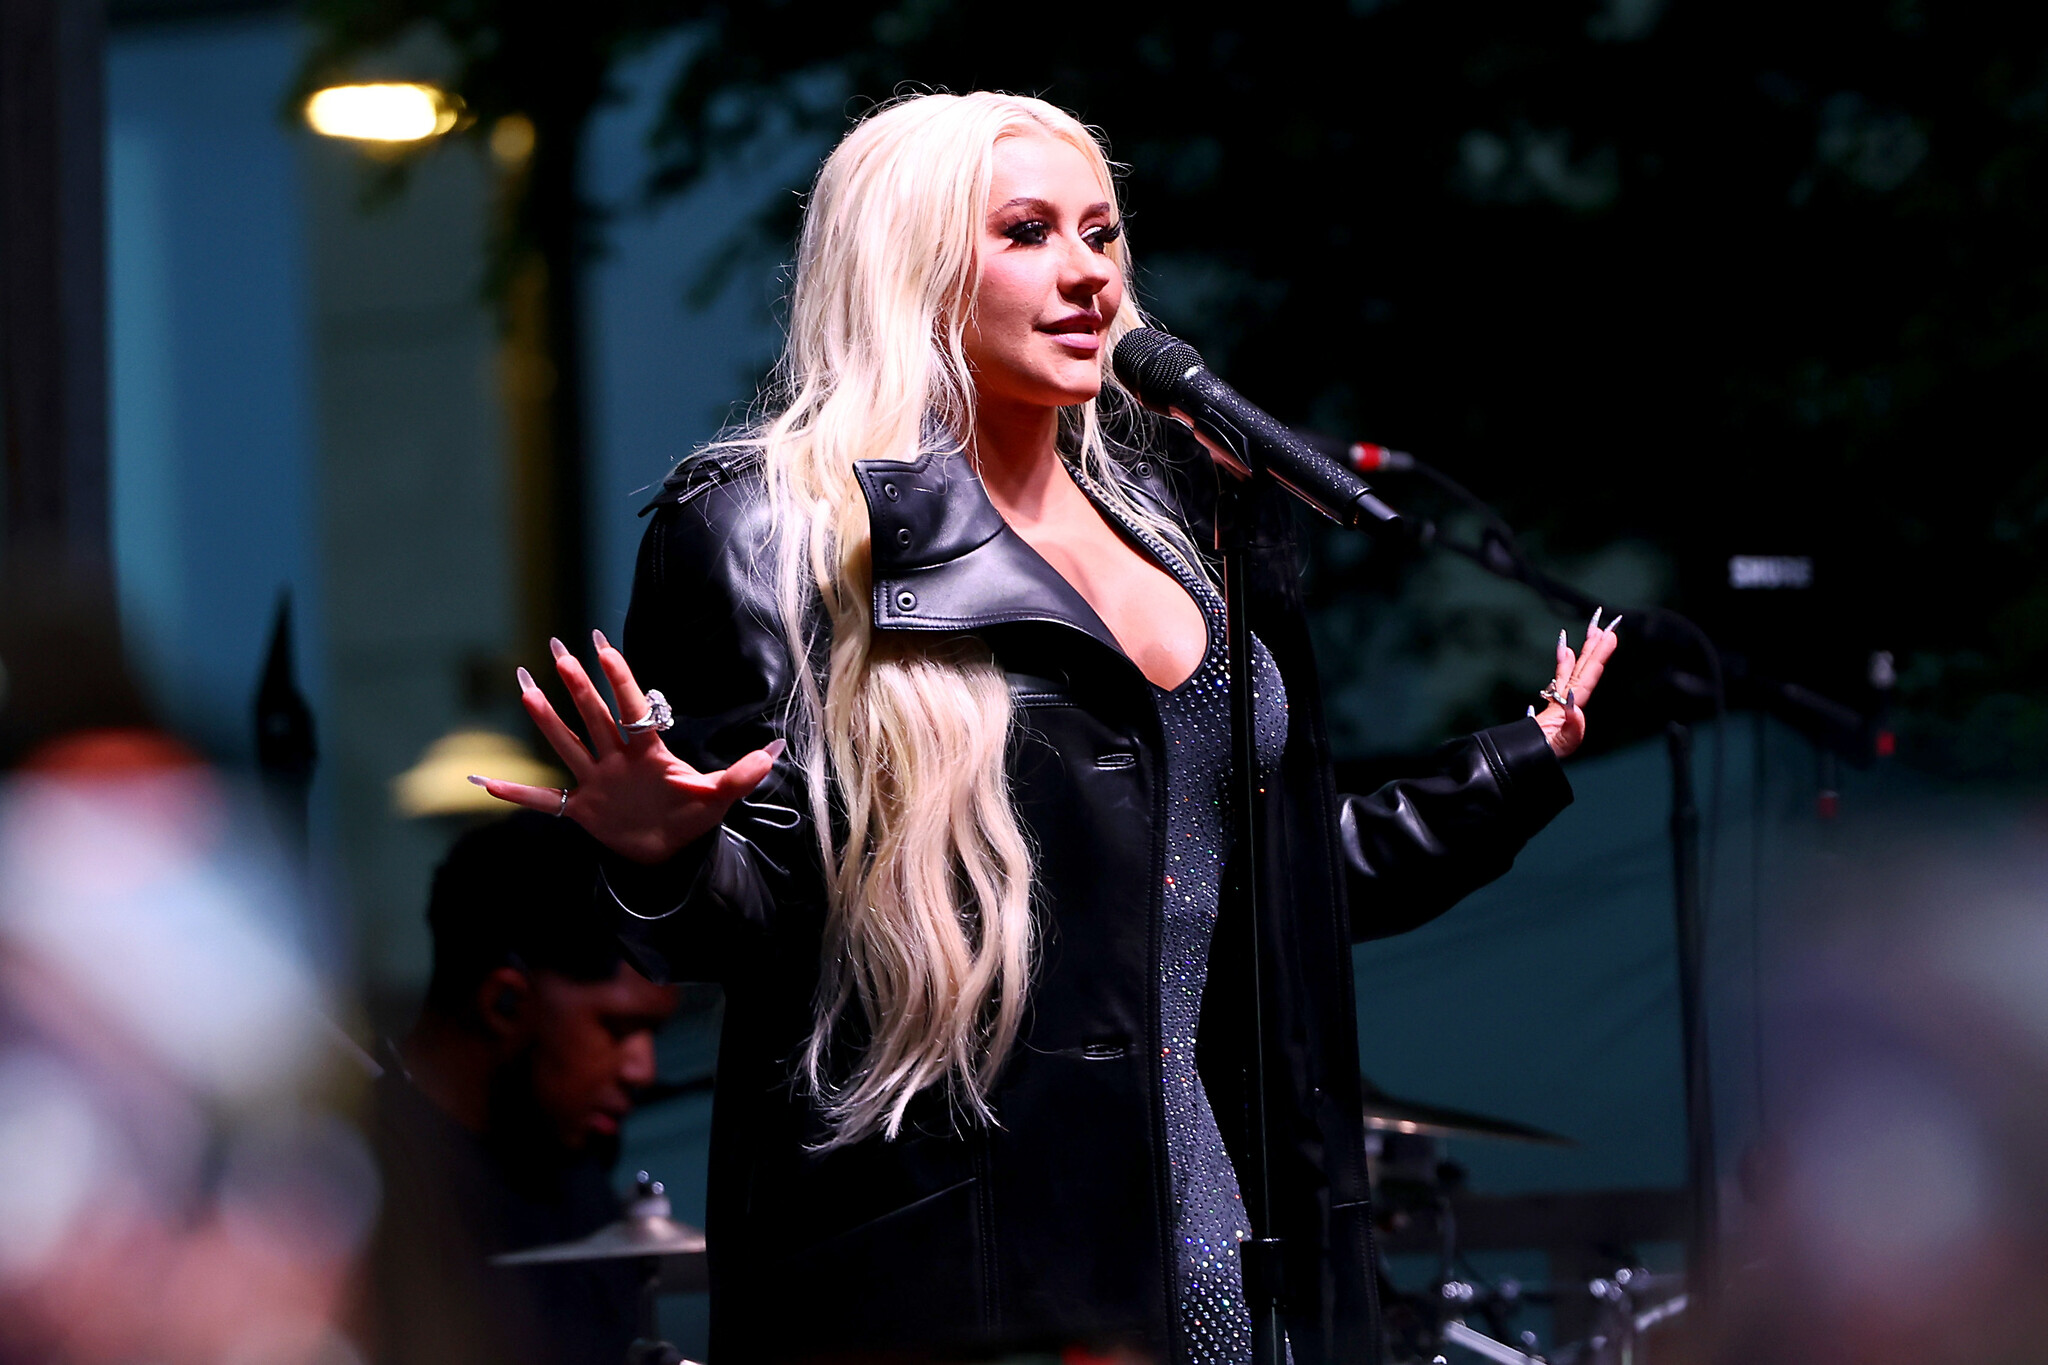 Christina Aguilera performing on stage